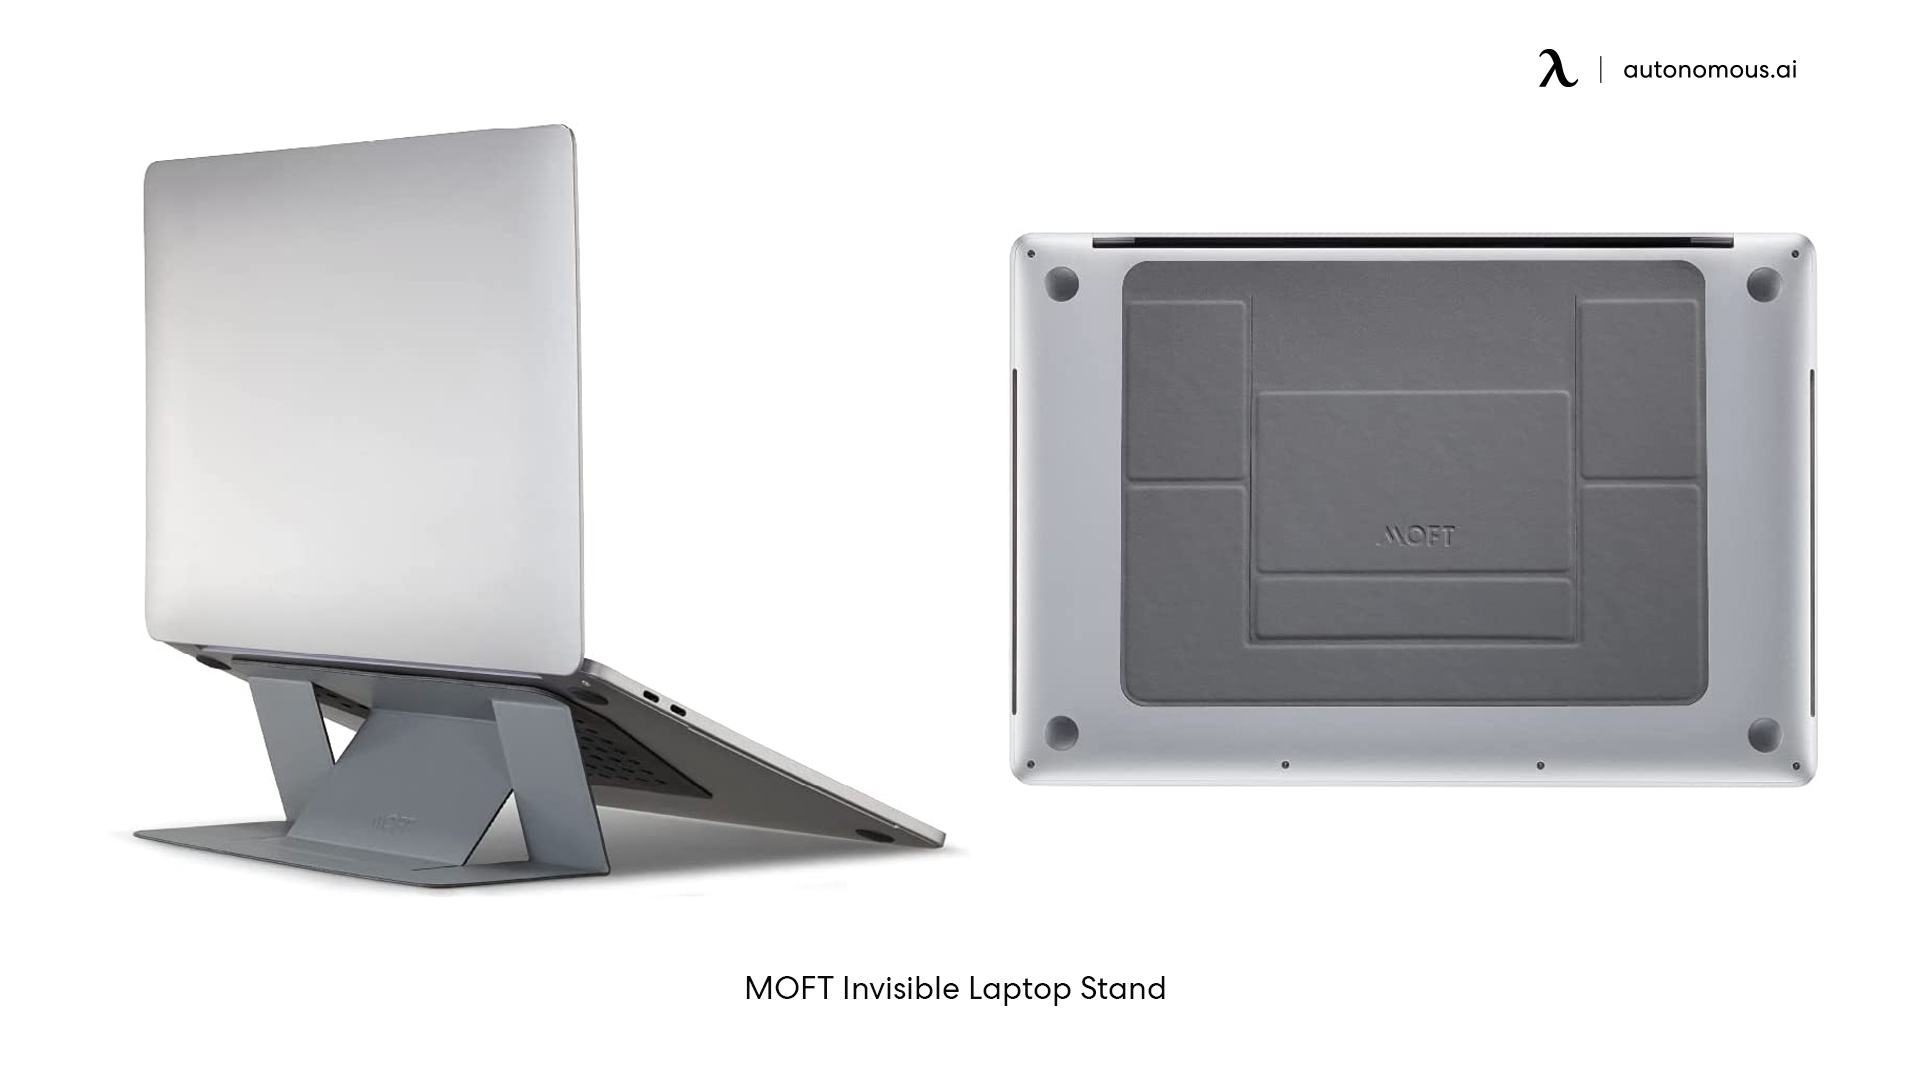 MOFT Invisible Laptop Stand modern desk accessories